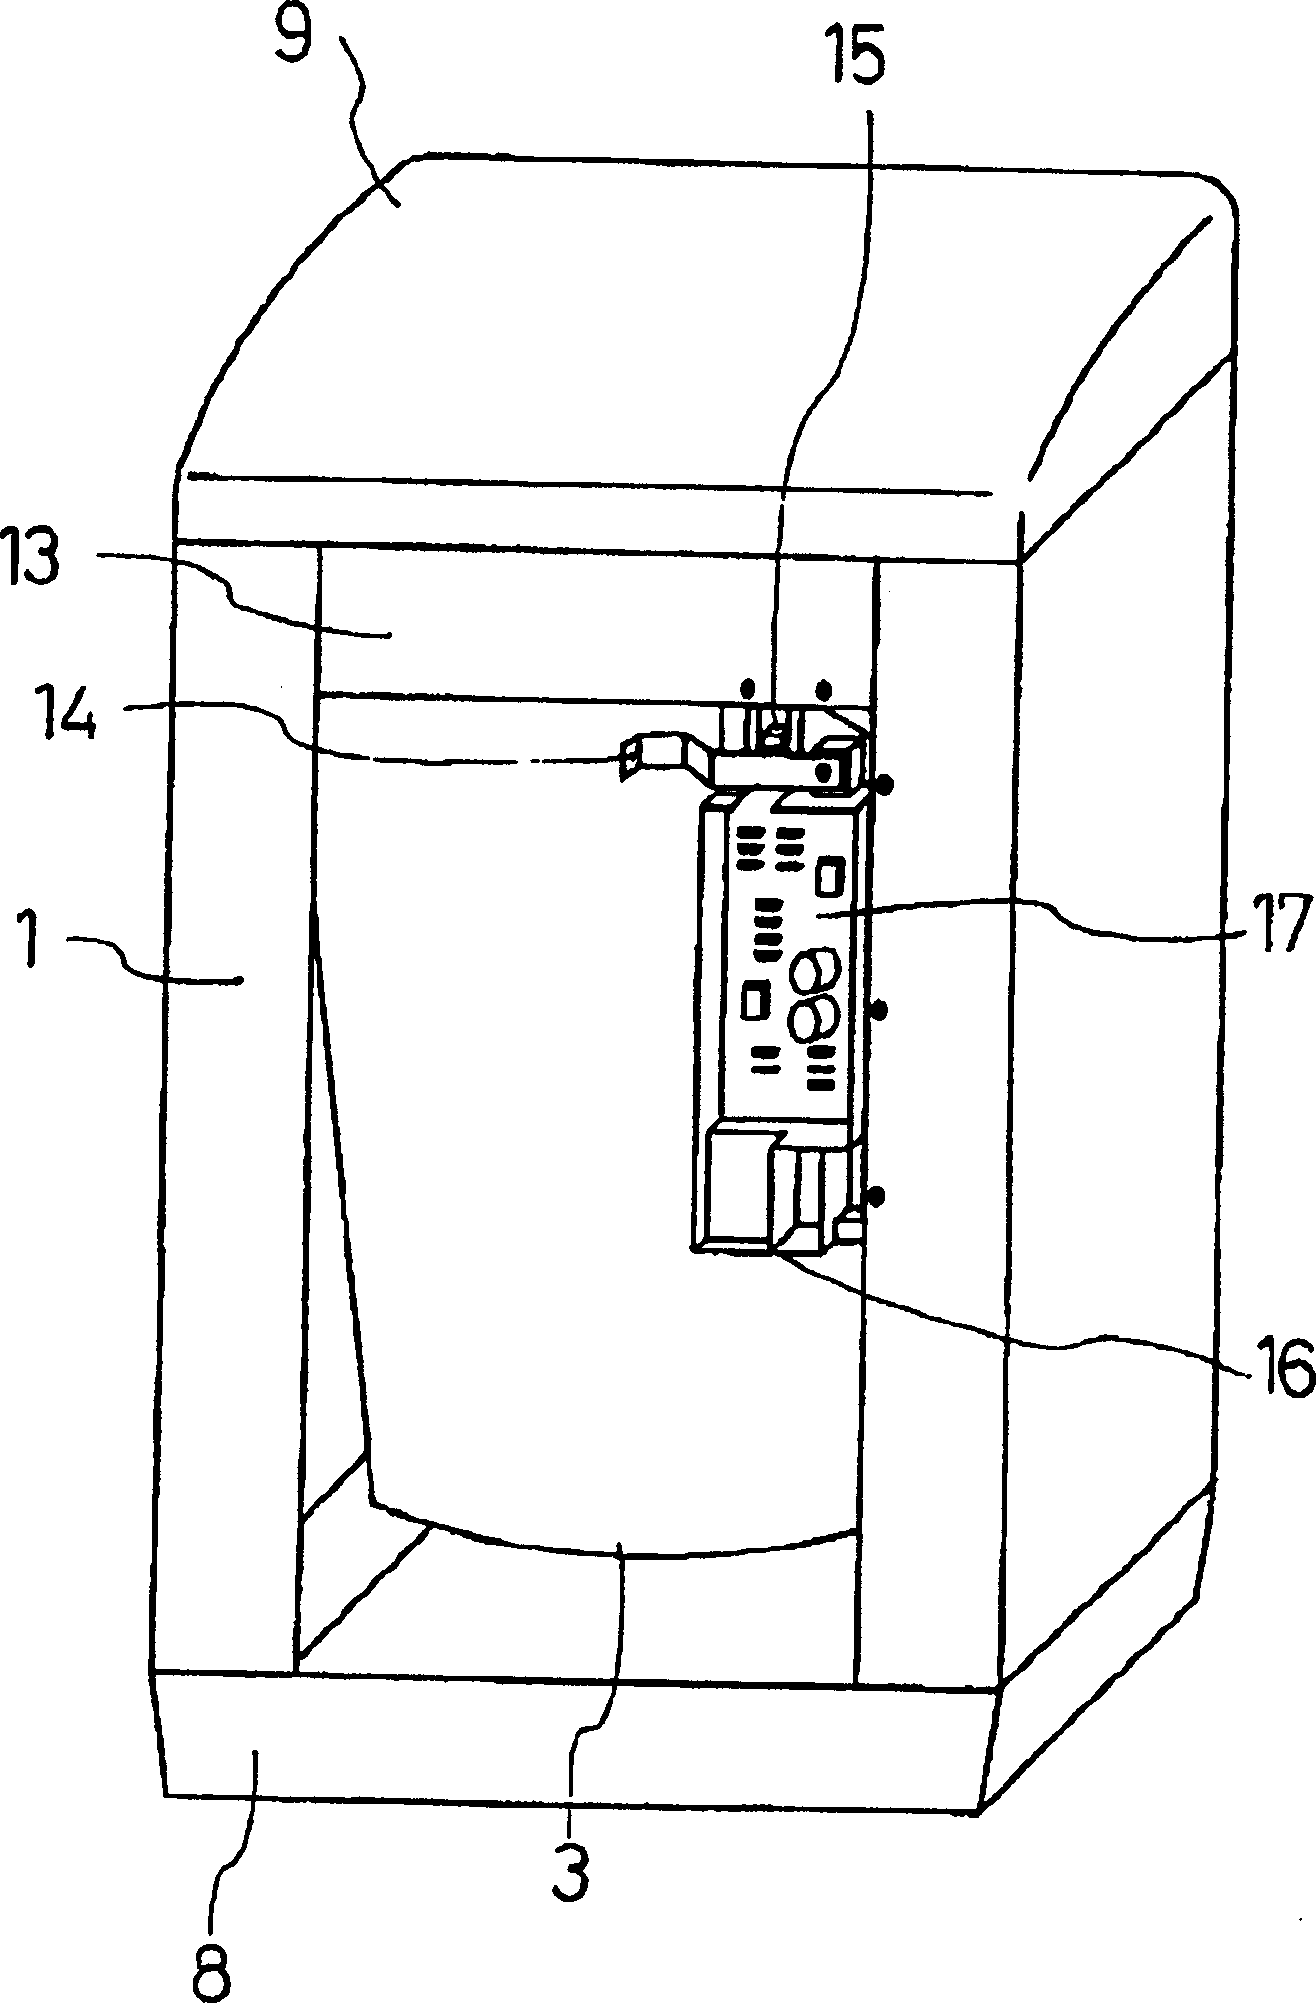 Apparatus and method for detecting imbalance in washing machines